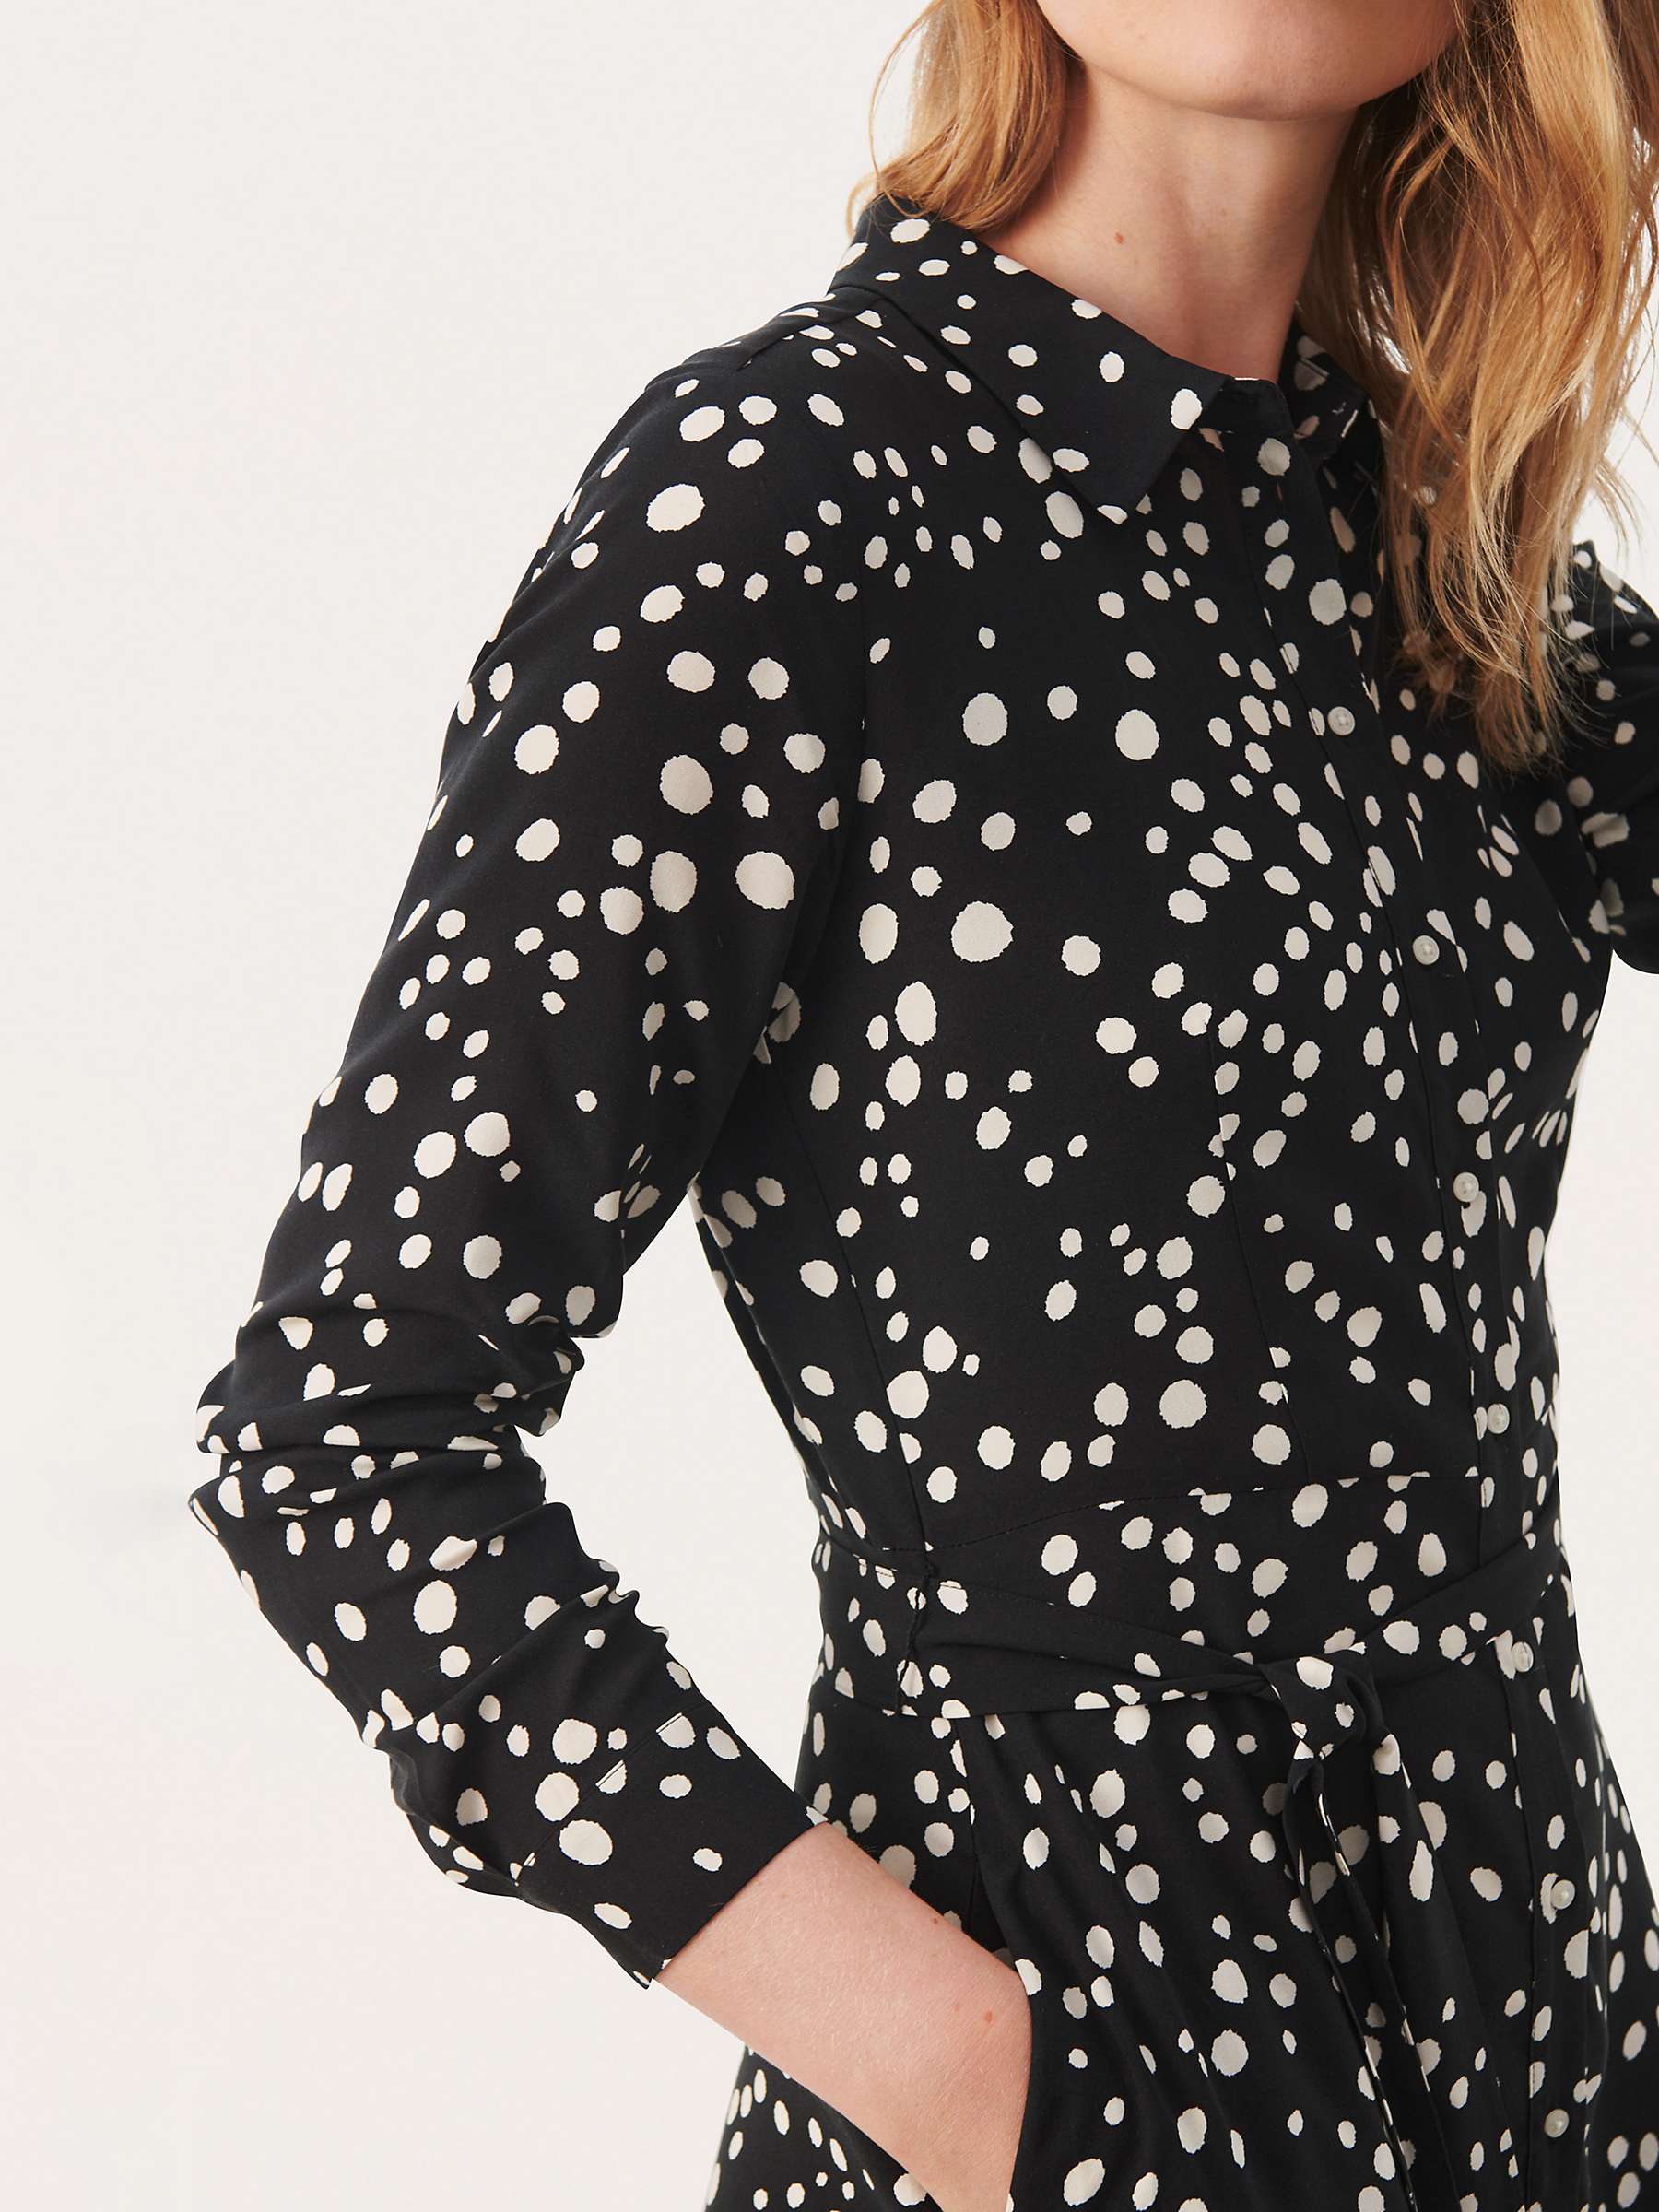 Buy Part Two Shelby Ecovero Dress, Black Dot Print Online at johnlewis.com